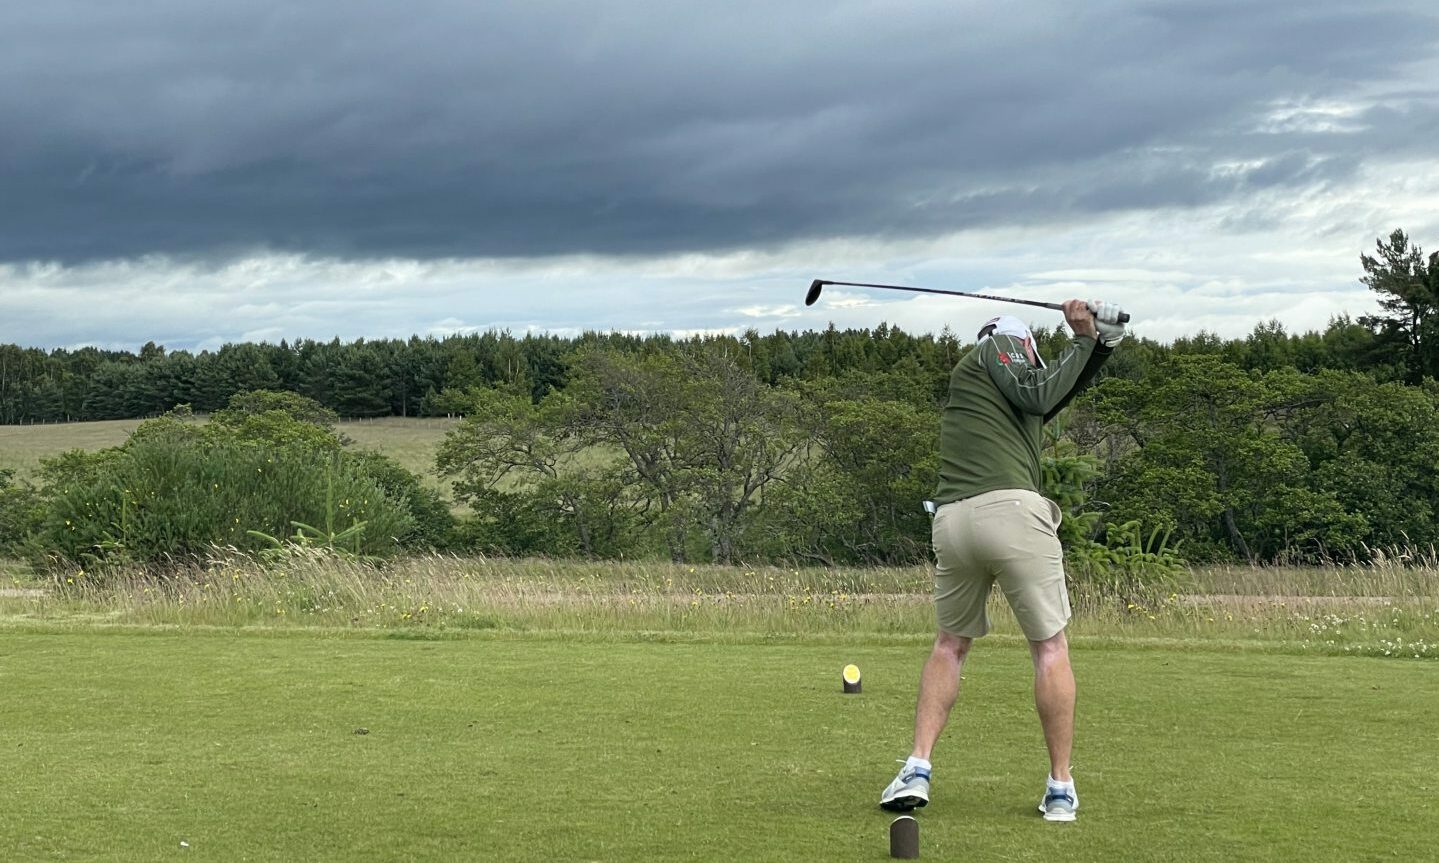 Blind golfing champ Barry McCluskey shares why blind golf is important ...